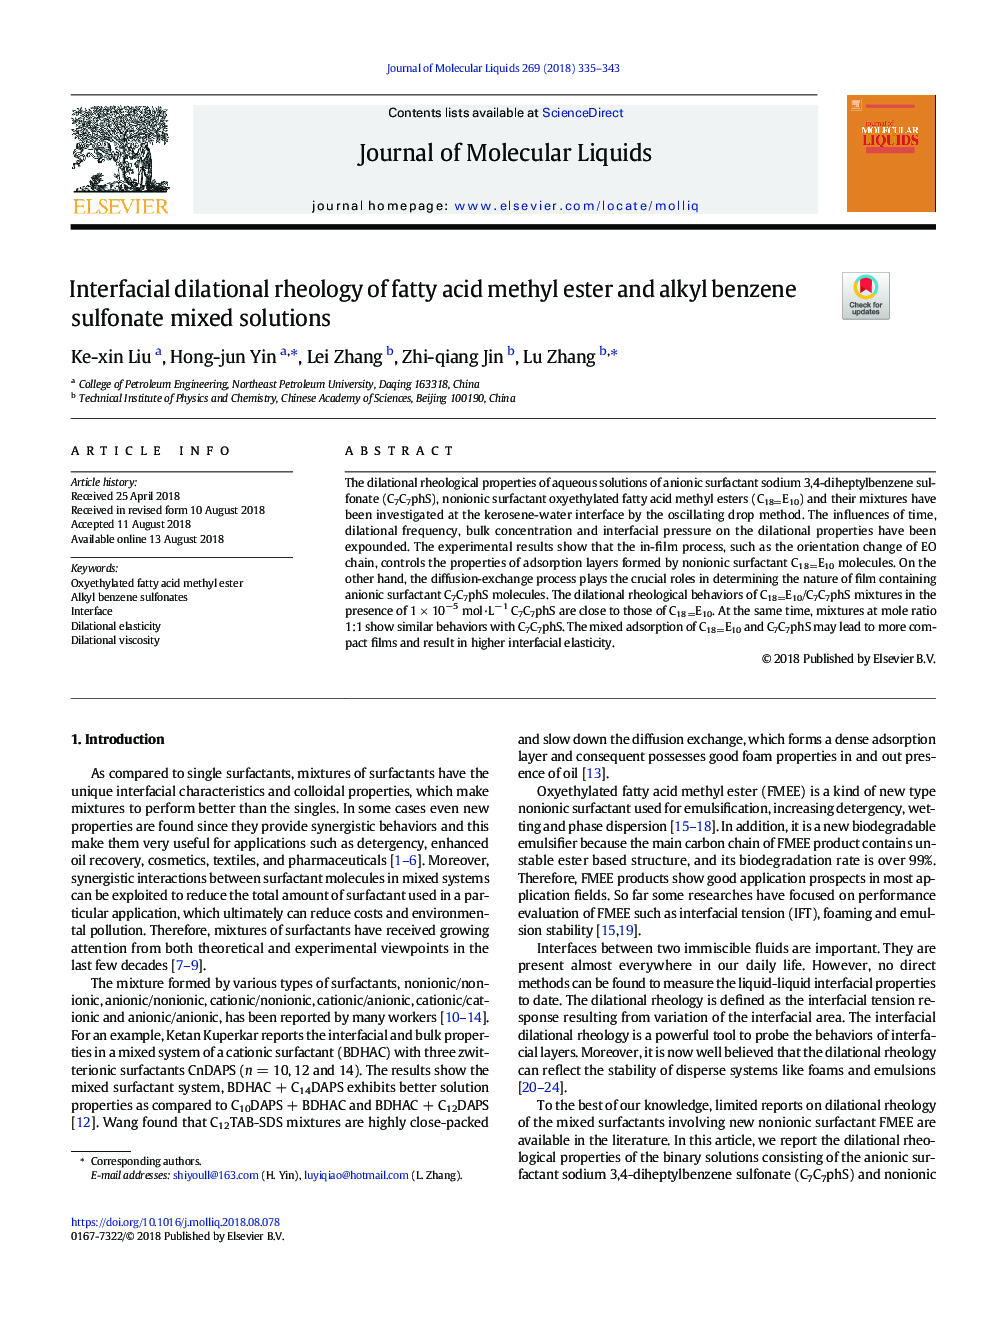 Interfacial dilational rheology of fatty acid methyl ester and alkyl benzene sulfonate mixed solutions